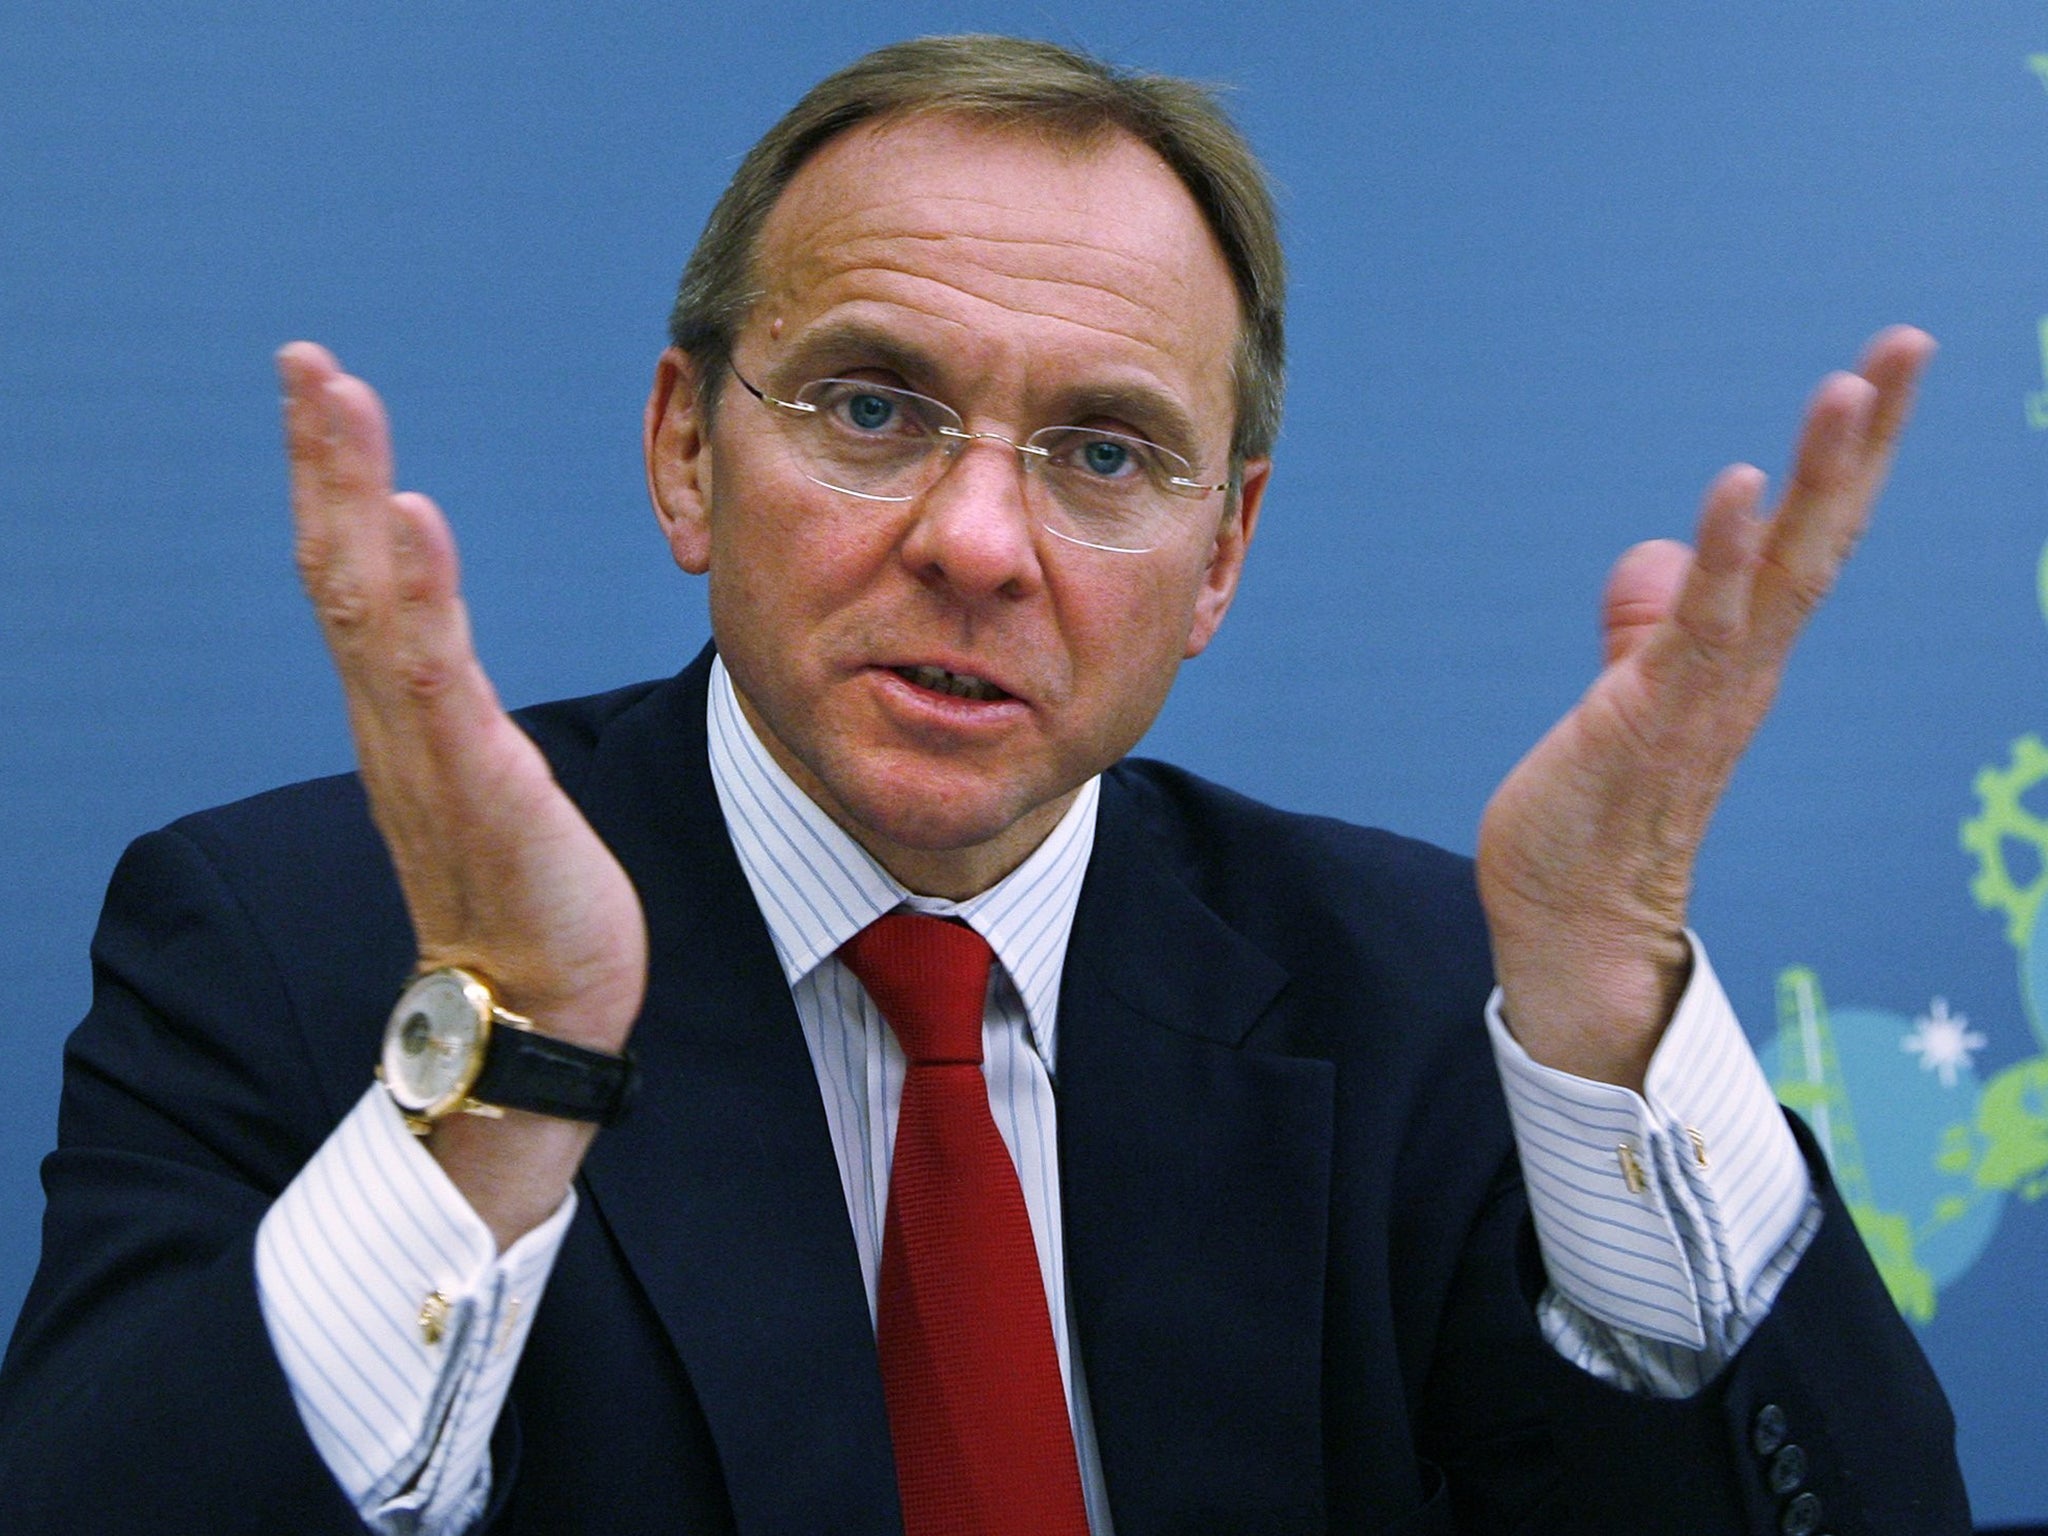 John Manzoni will be responsible for making savings across Whitehall in areas such as IT, procurement and contracts